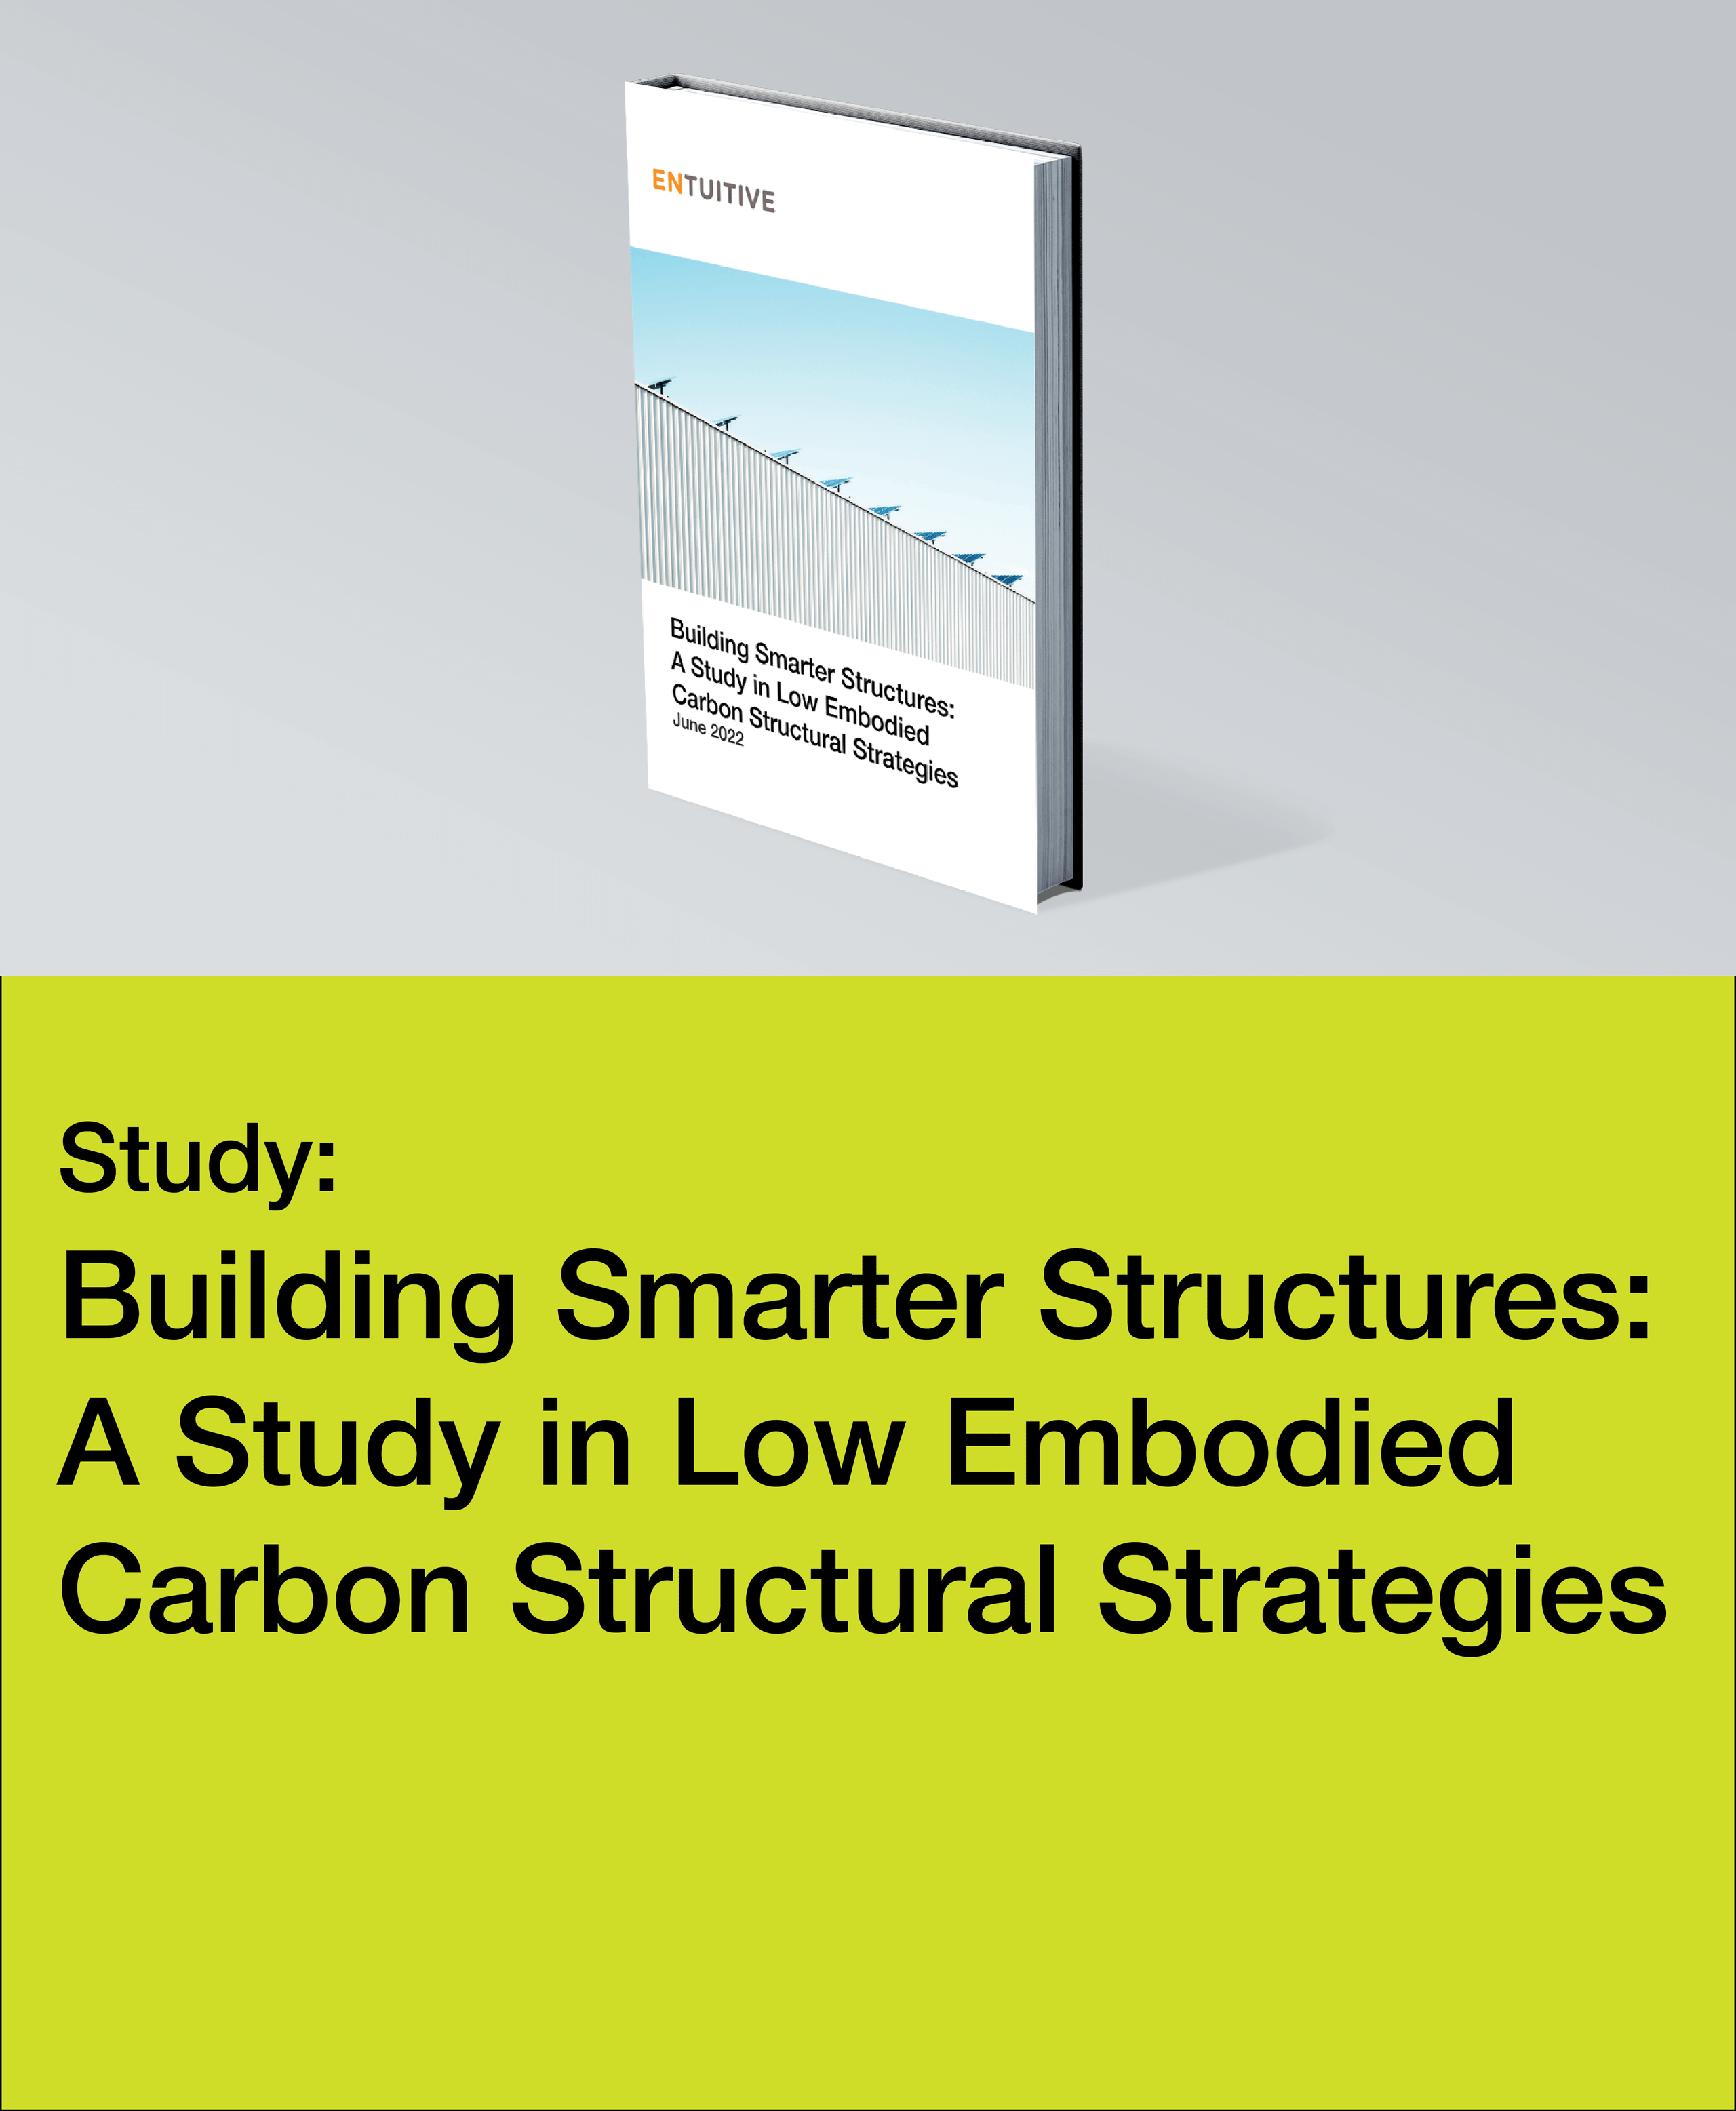 Building Smarter Structures: A Study in Low Embodied Carbon Structural Strategies